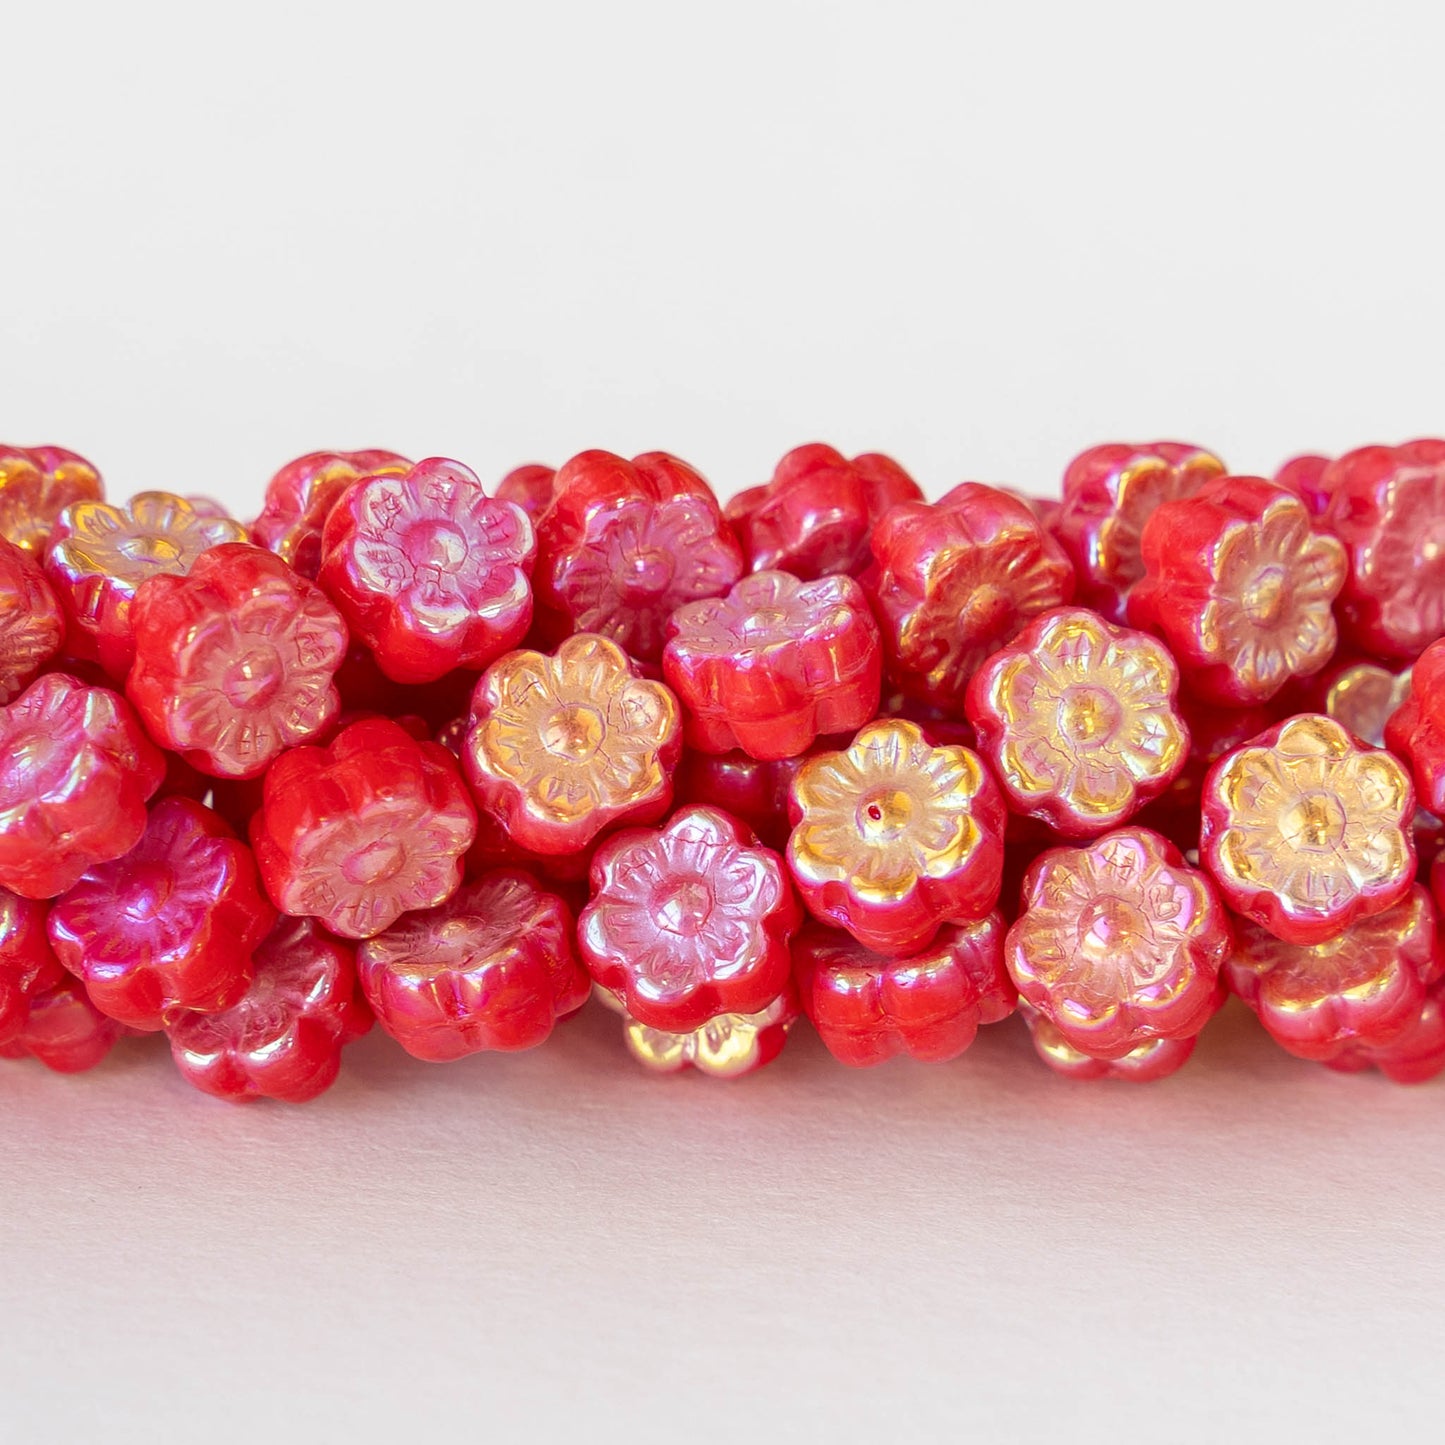 6mm Flower Beads - Opaque Red AB  - 30 beads